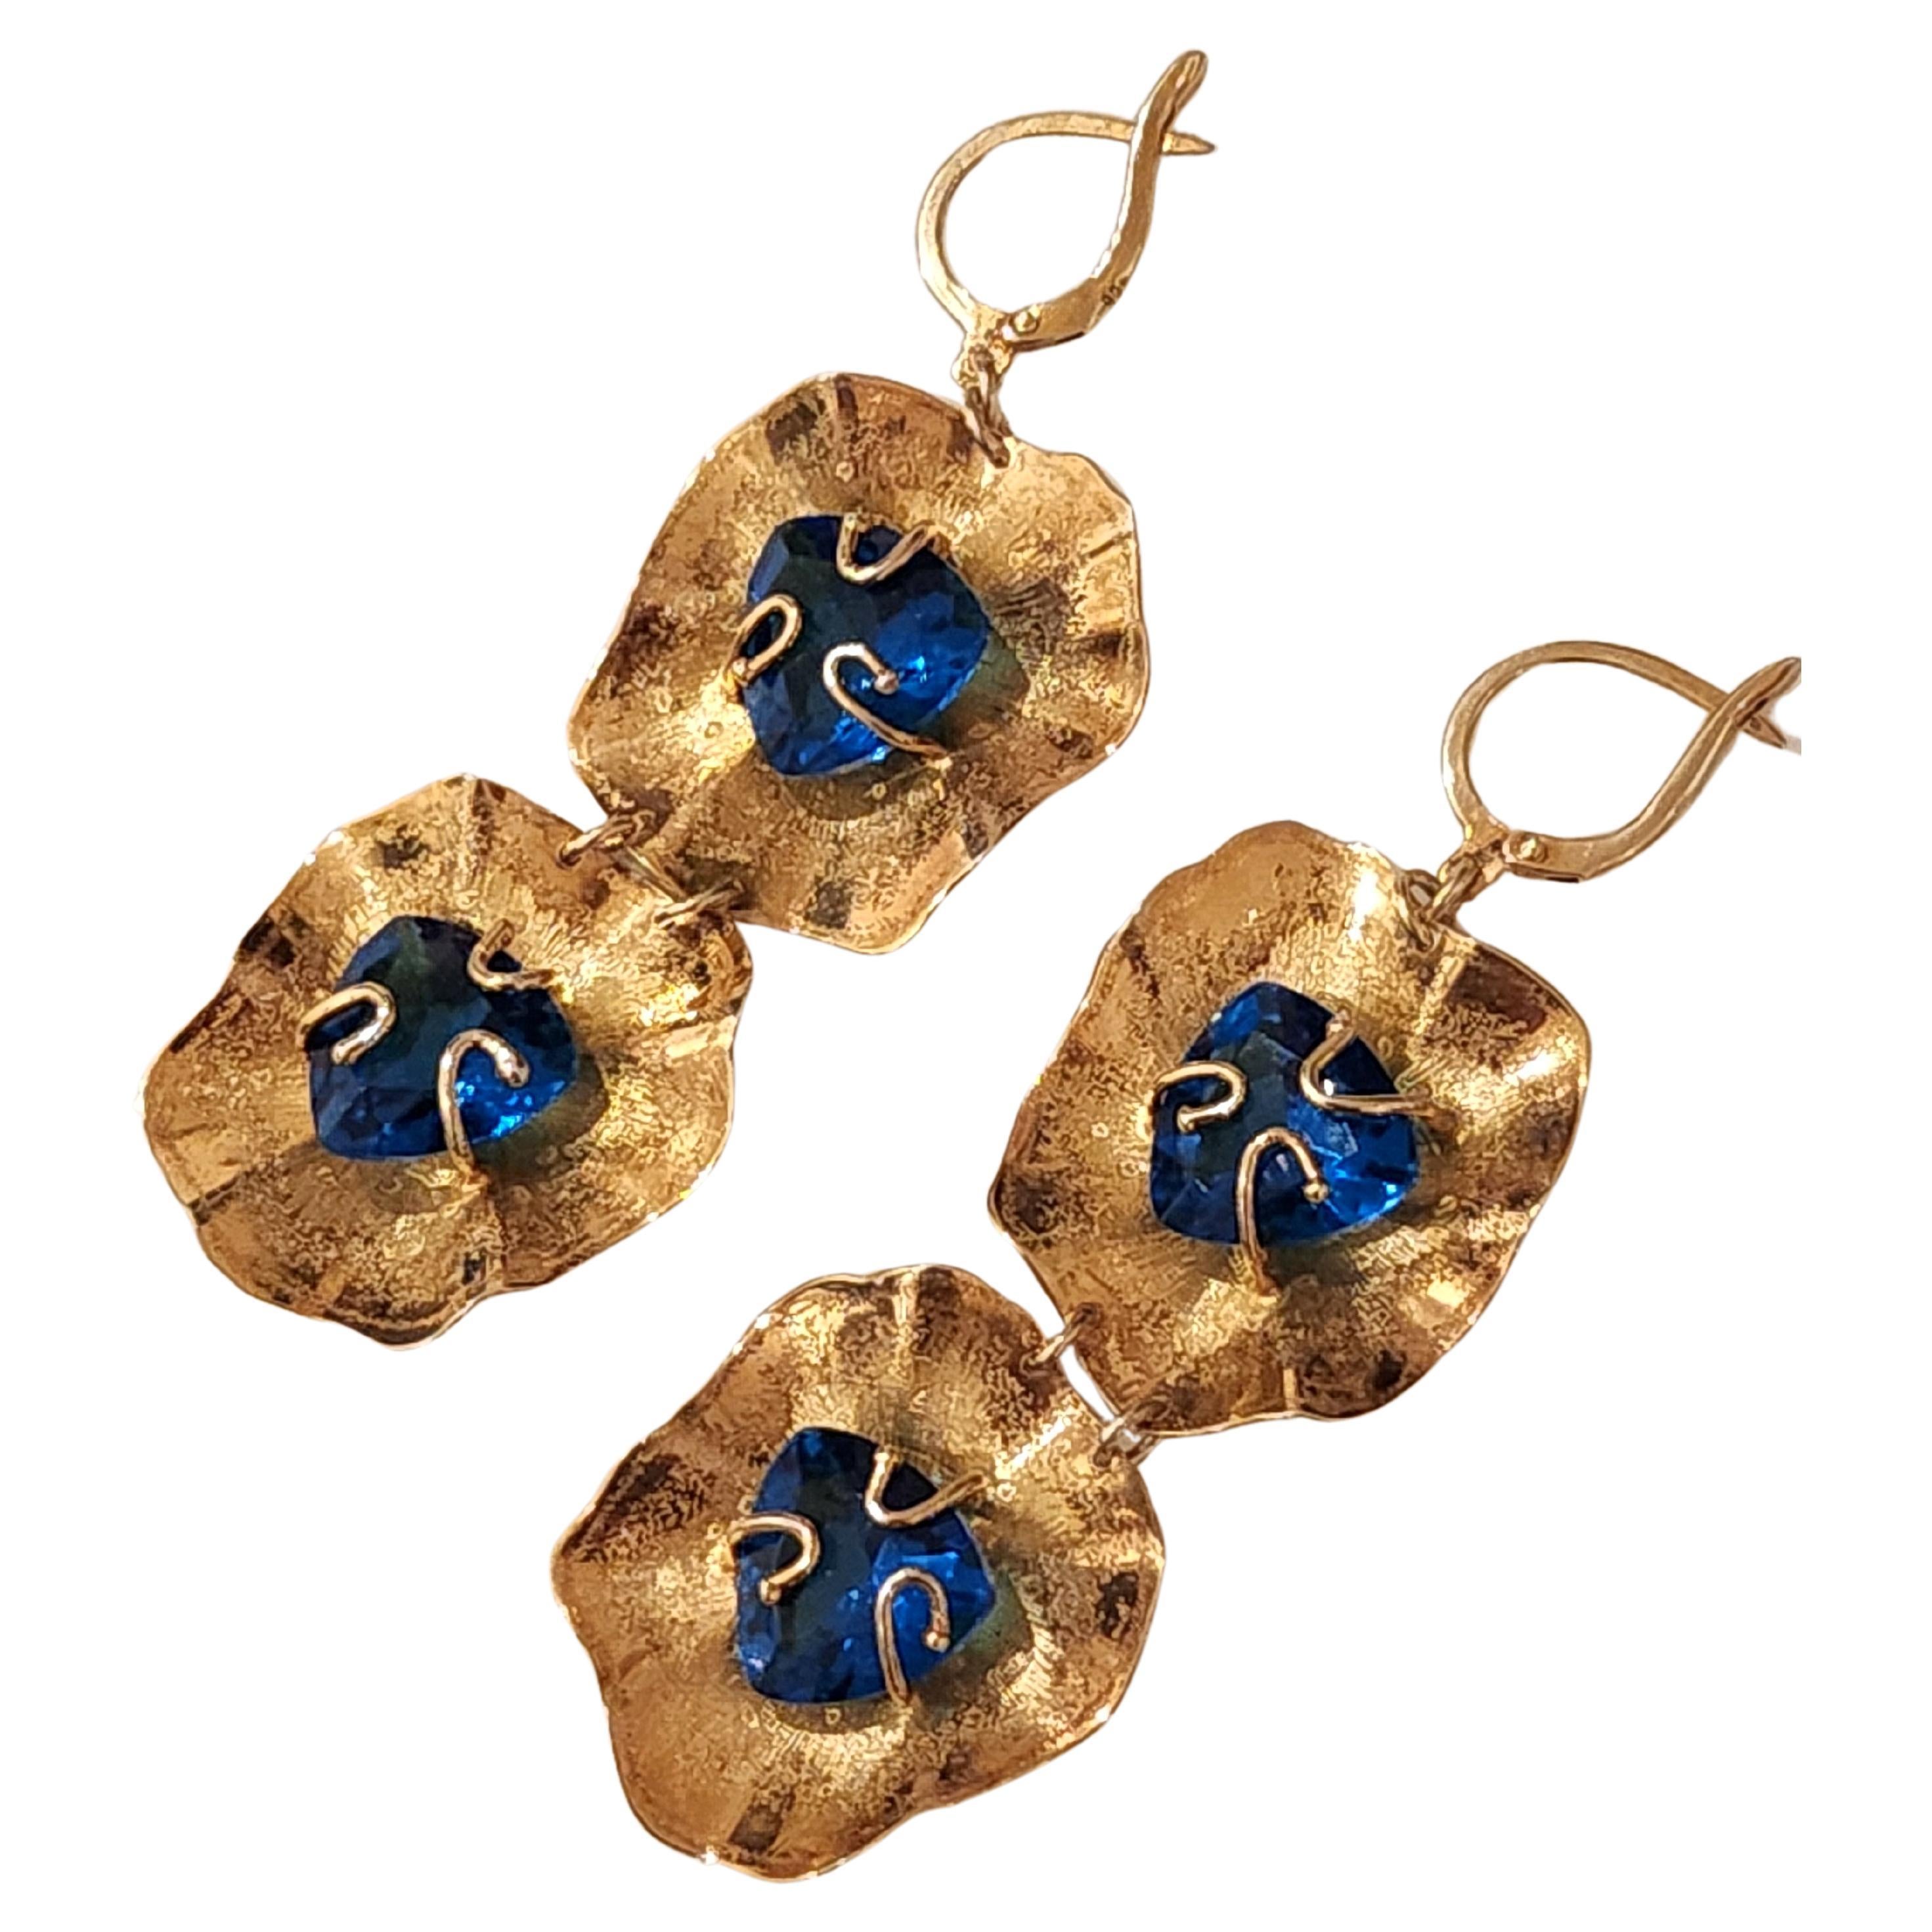 Silver 925 large hand made earrings in dangling scrubed gold plated style decorted with blue stones with total silver weight of 18 grams in fine workmanship